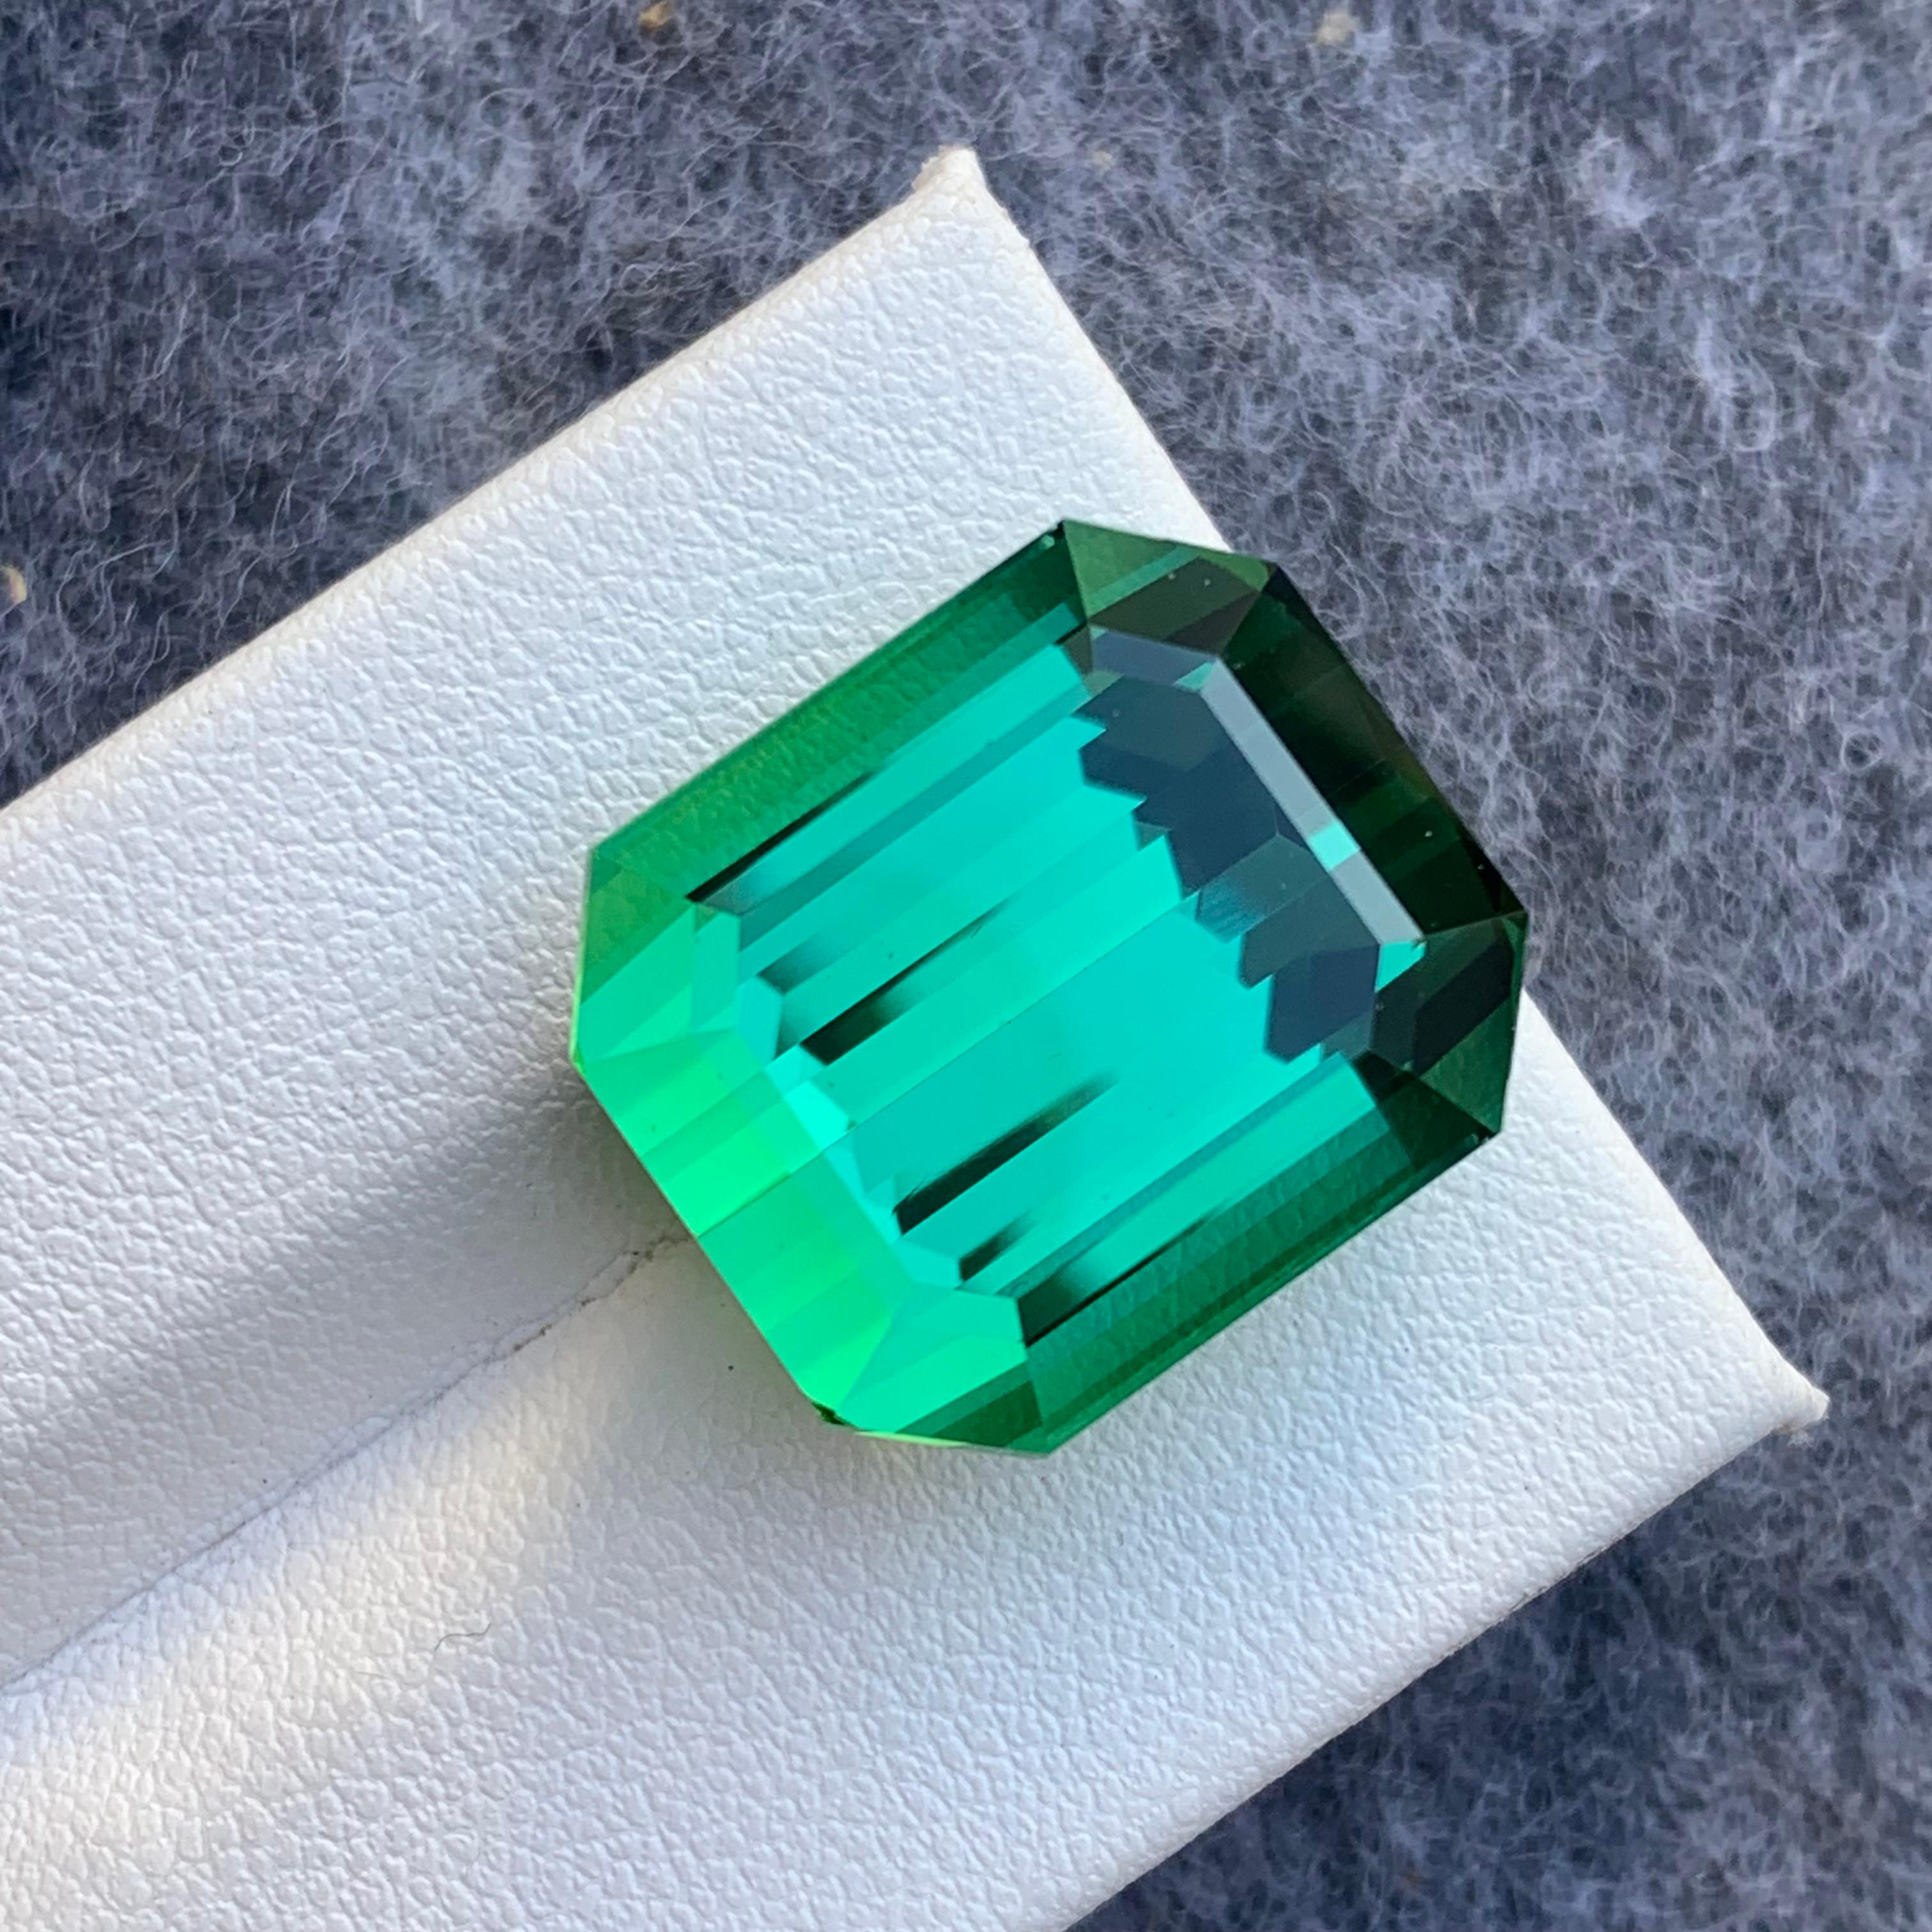 Gemstone Type : Tourmaline
Weight : 30.0 Carats
Dimensions : 18x15.7x12.3 Mm
Origin : Kunar Afghanistan
Clarity : Loupe Clean
Shape: Emerald
Color: Lagoon Green 
Certificate: On Demand
Basically, mint tourmalines are tourmalines with pastel hues of